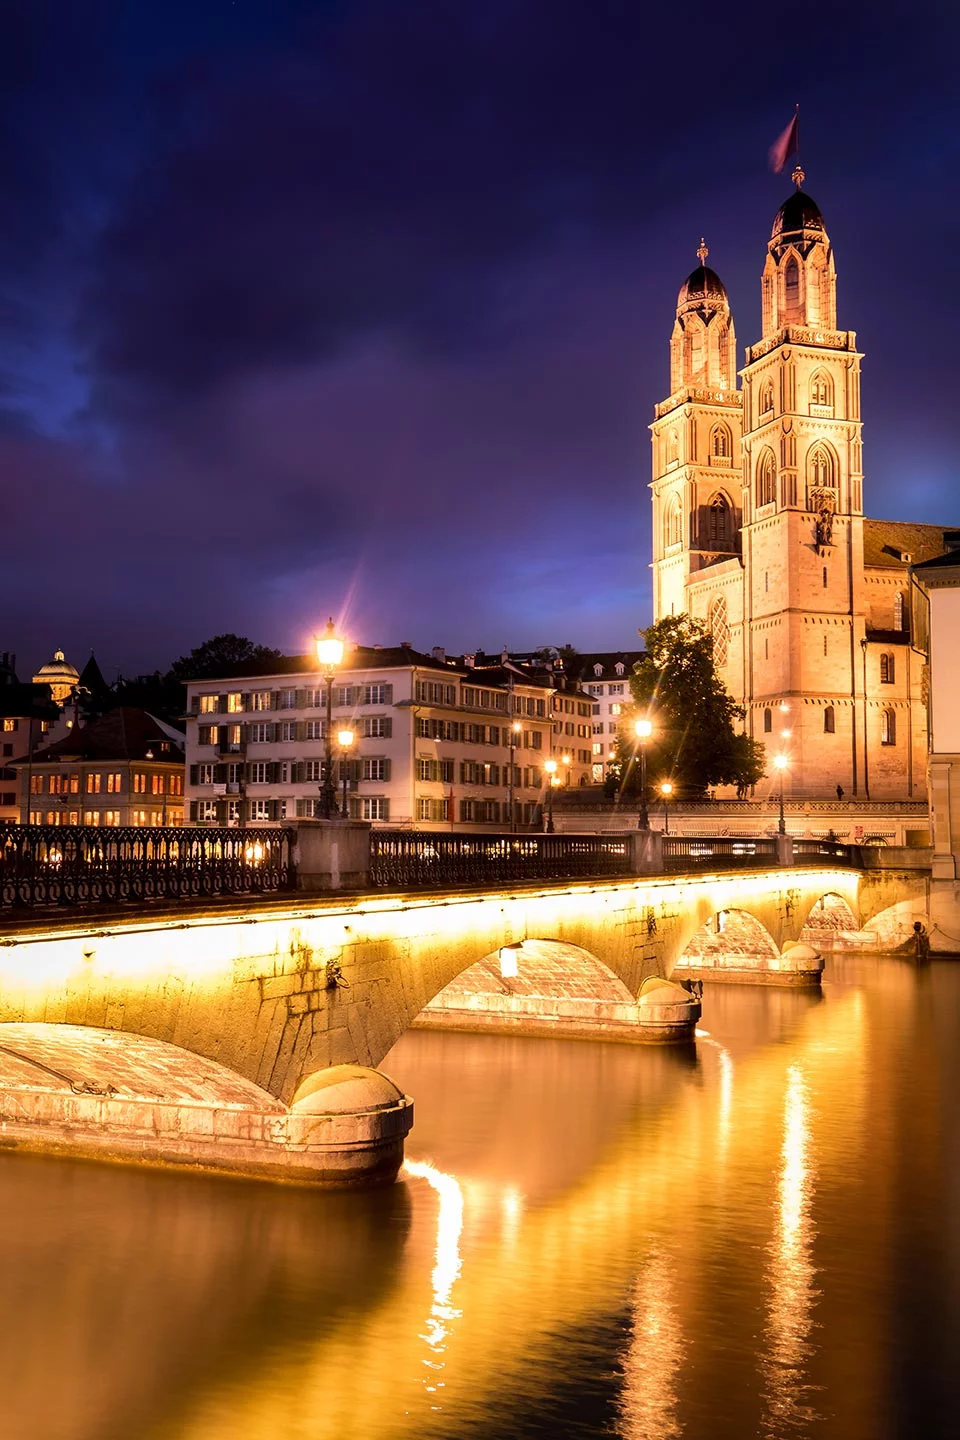 Zurich itinerary - Things to do in Zurich - Grossmunster